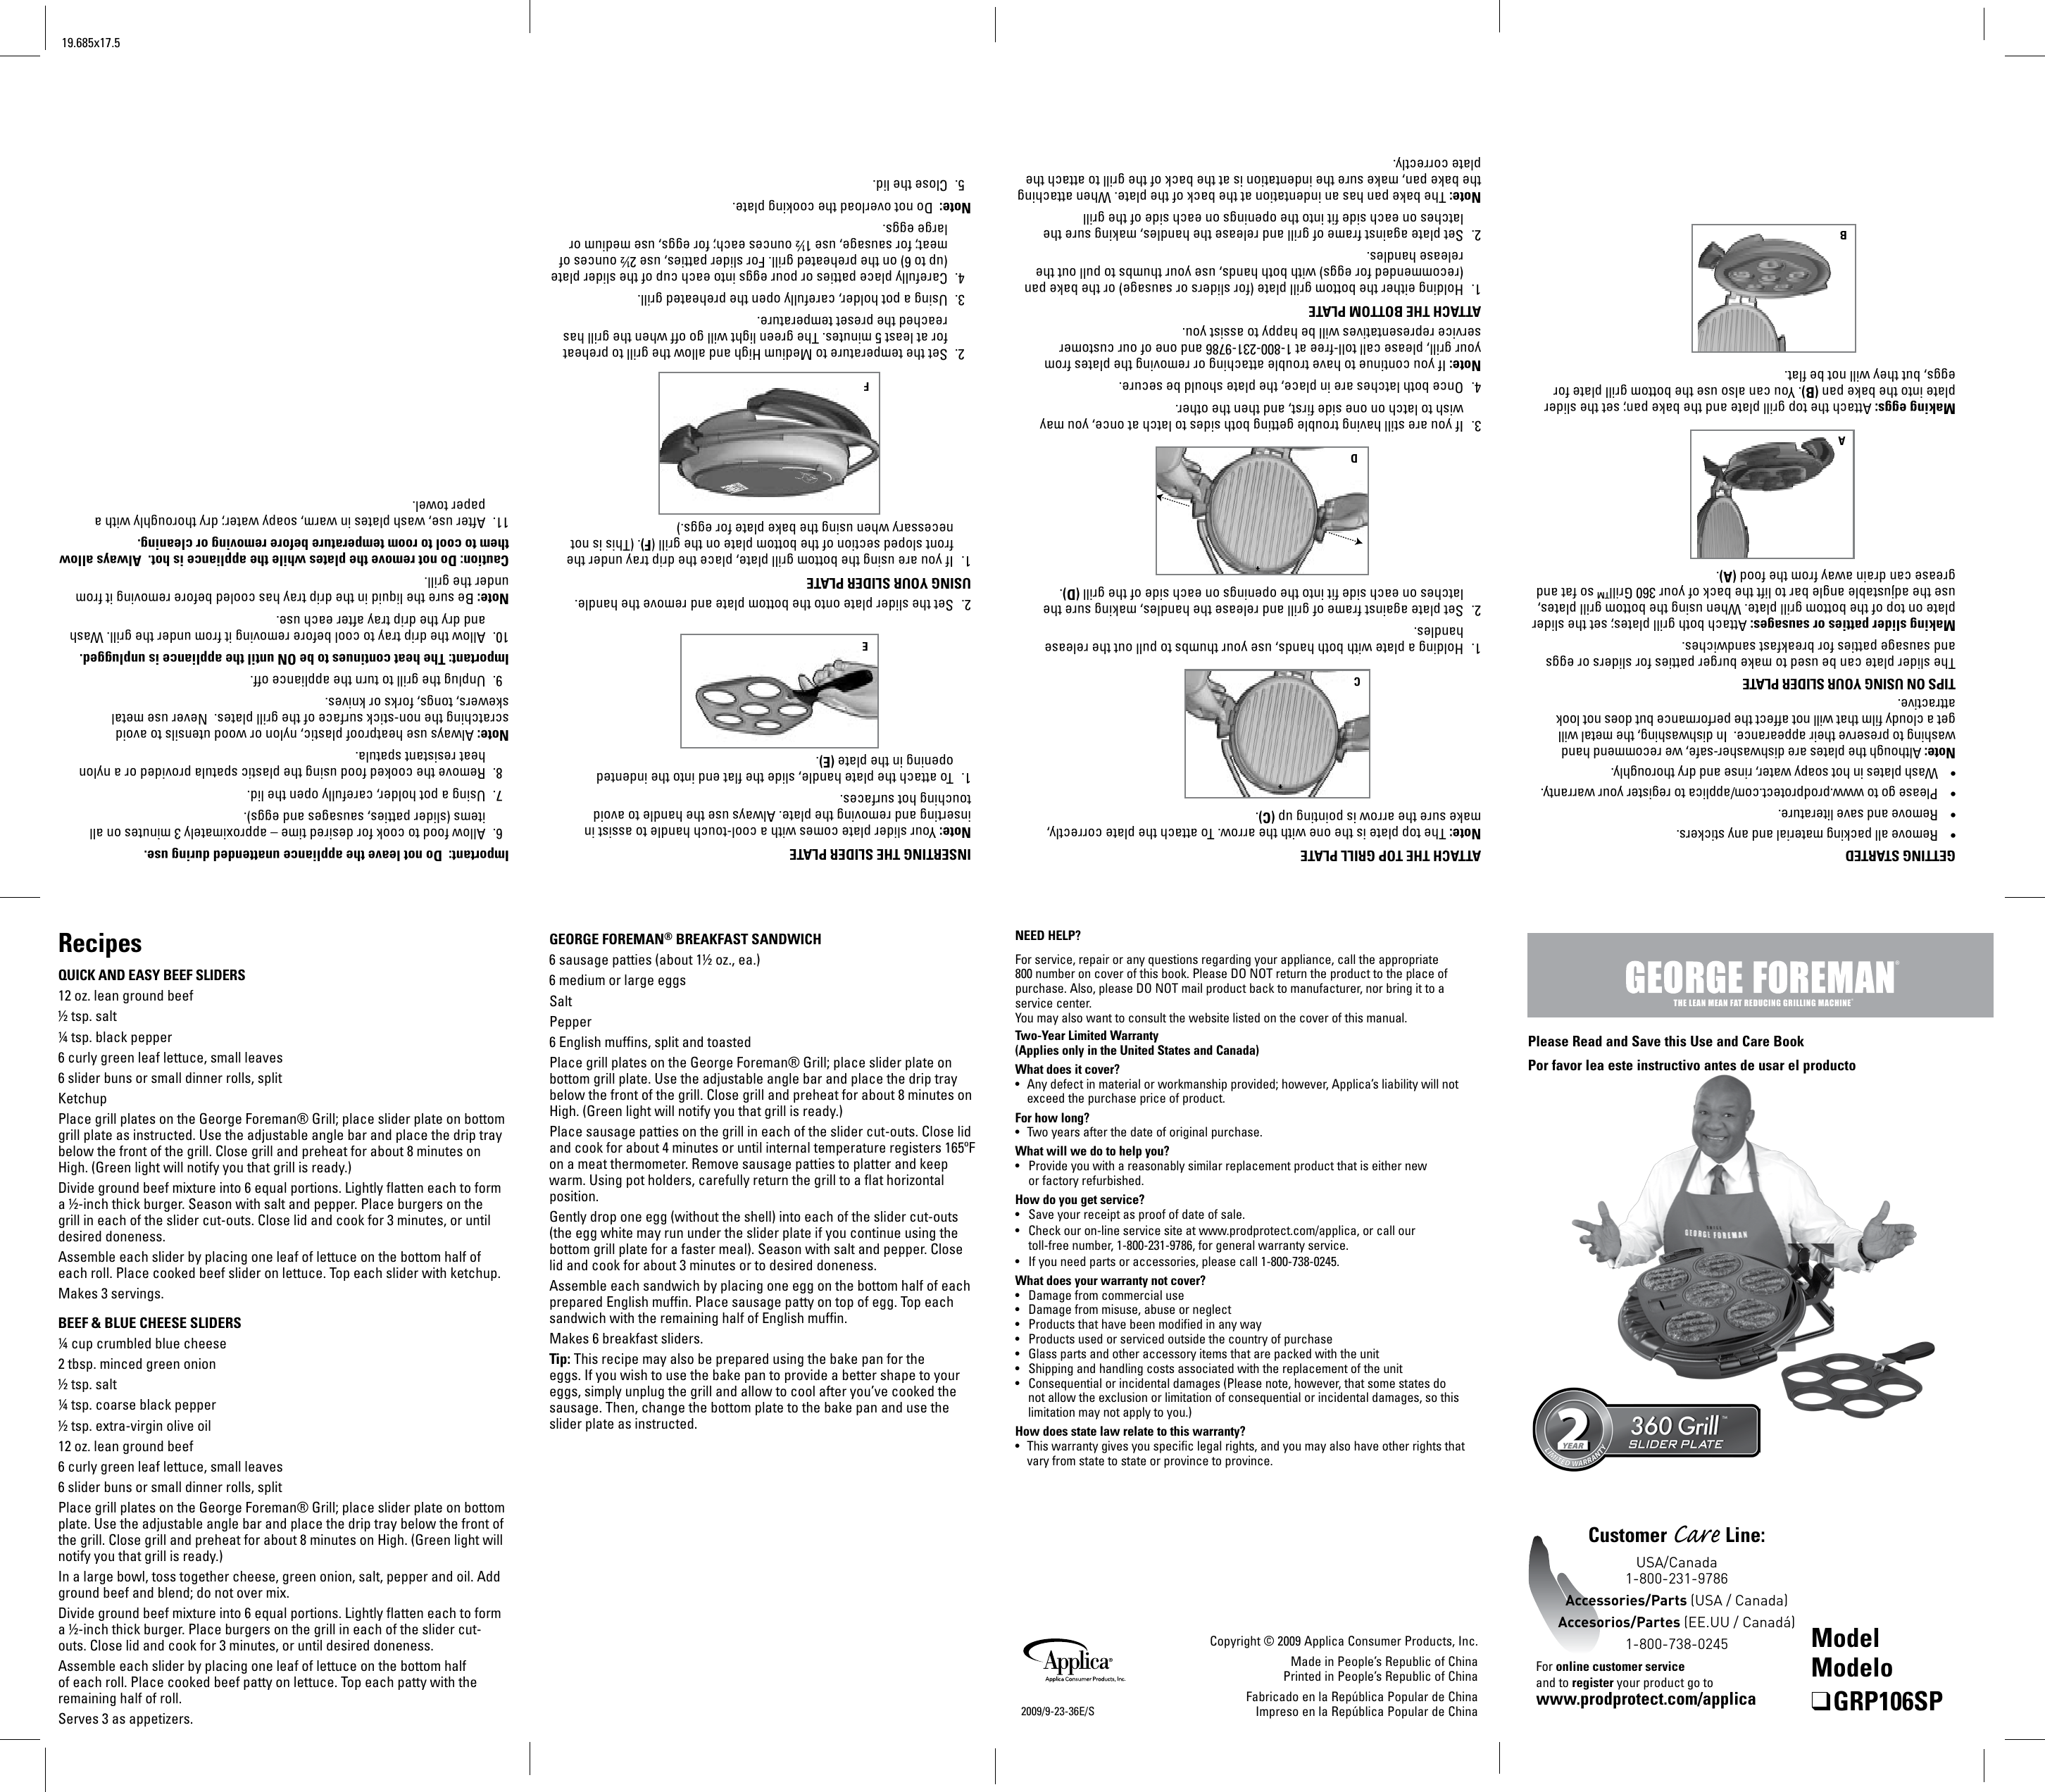 Page 2 of 2 - George-Foreman George-Foreman-Grp106Sp-Use-And-Care-Manual-  George-foreman-grp106sp-use-and-care-manual